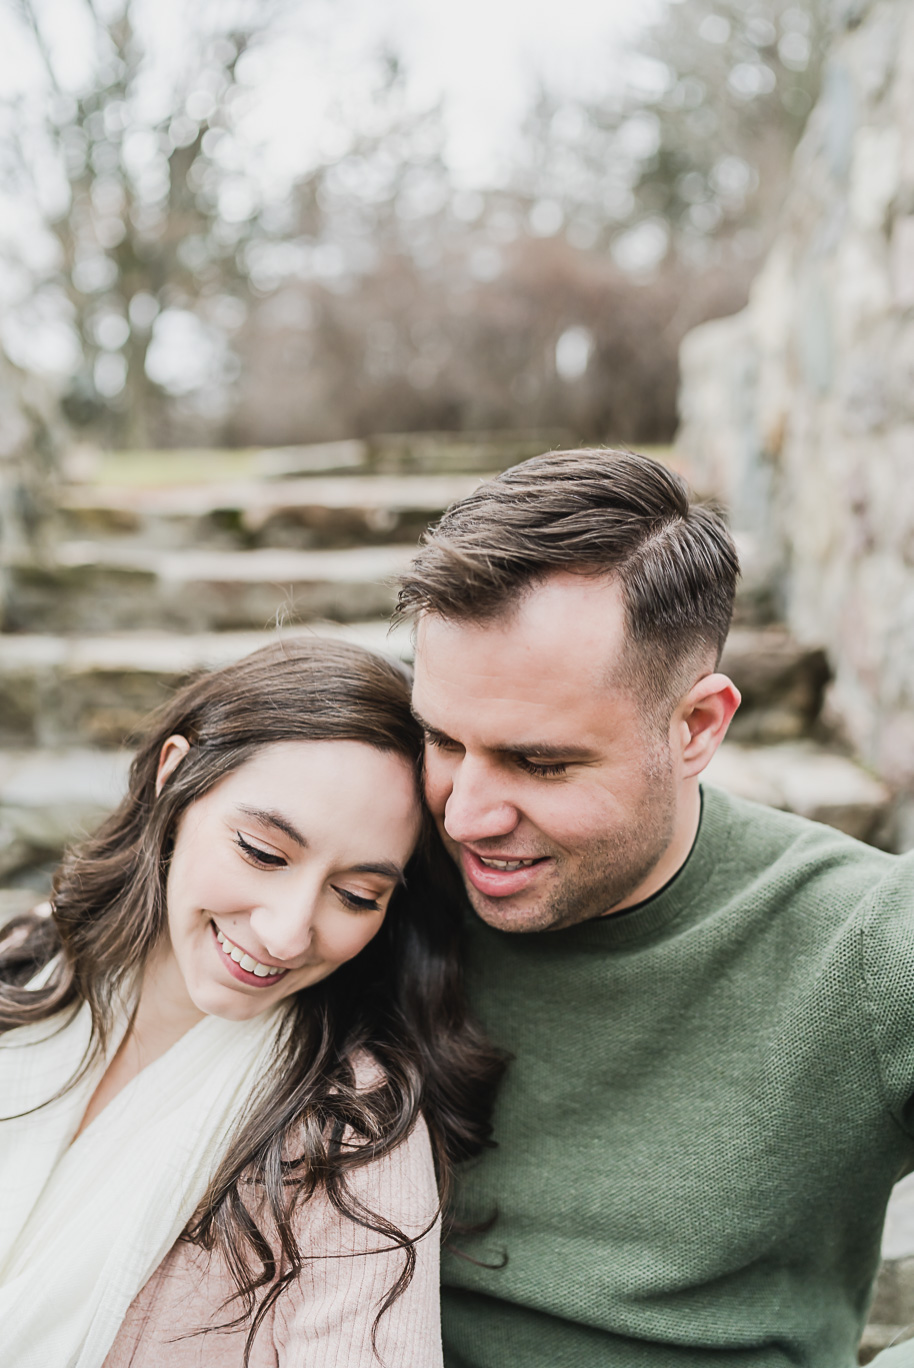 Nestled in the woods of Washington, Michigan we explored with Cat and Joe for their Stony Creek engagement photos with Kari Dawson Photo.